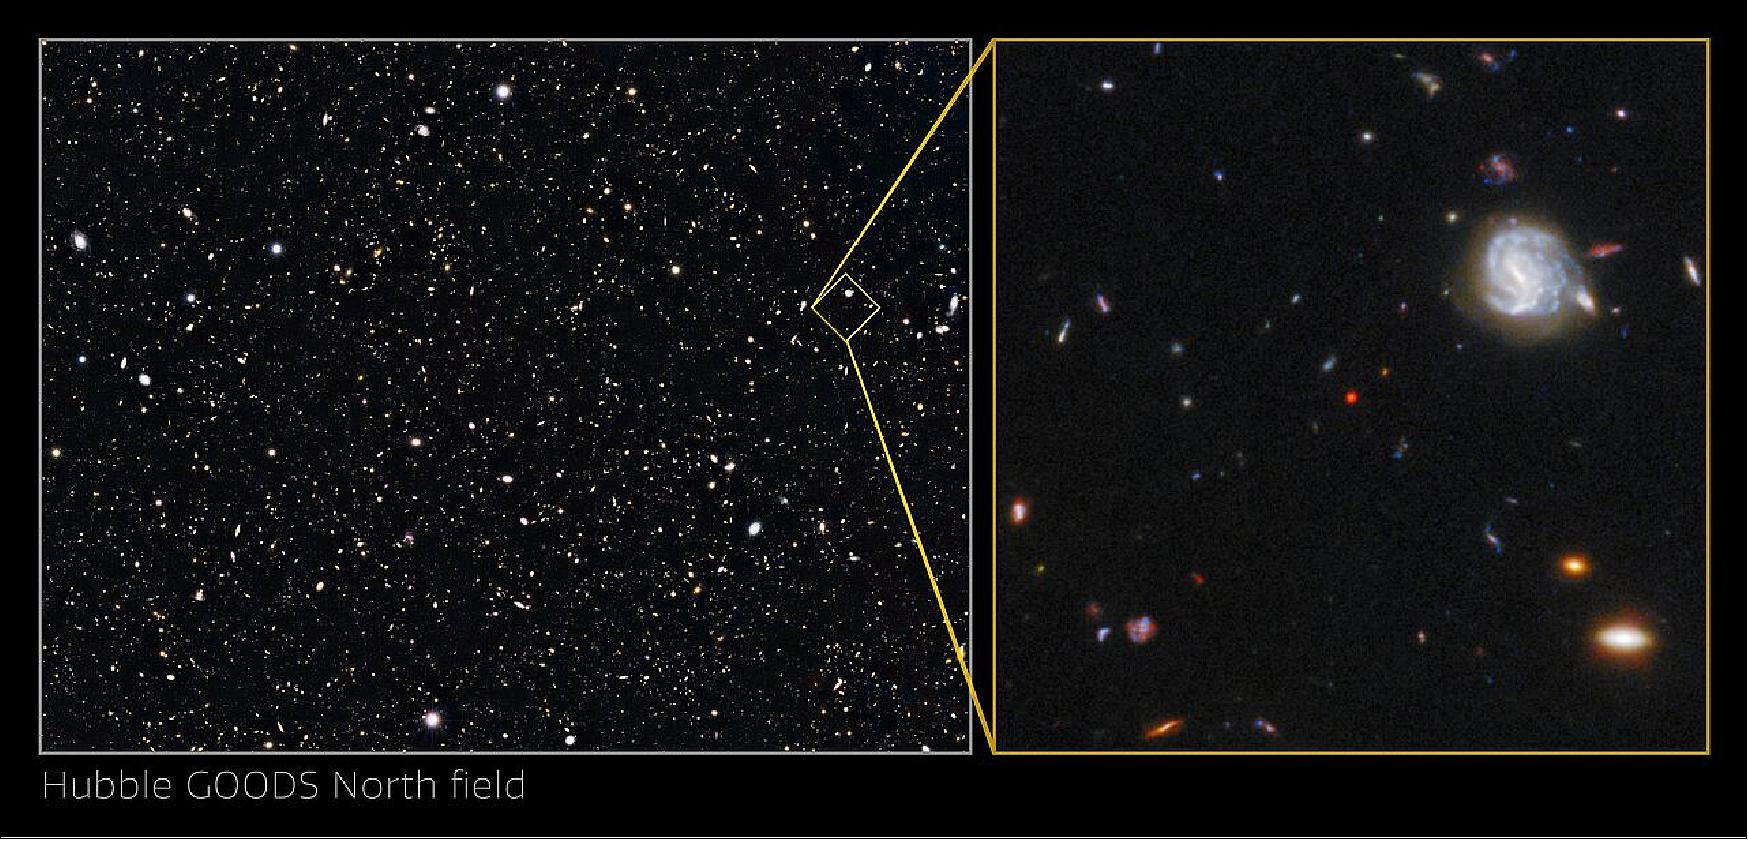 Figure 55: An international team of astronomers using archival data from the NASA/ESA Hubble Space Telescope and other space- and ground-based observatories have discovered a unique object in the distant, early Universe that is a crucial link between young star-forming galaxies and the earliest supermassive black holes. This object is the first of its kind to be discovered so early in the Universe’s history, and had been lurking unnoticed in one of the best-studied areas of the night sky. The object, which is referred to as GNz7q, is shown here in the centre of the image of the Hubble GOODS-North field [image credit: NASA, ESA, G. Illingworth (University of California, Santa Cruz), P. Oesch (University of California, Santa Cruz; Yale University), R. Bouwens and I. Labbé (Leiden University), and the Science Team]